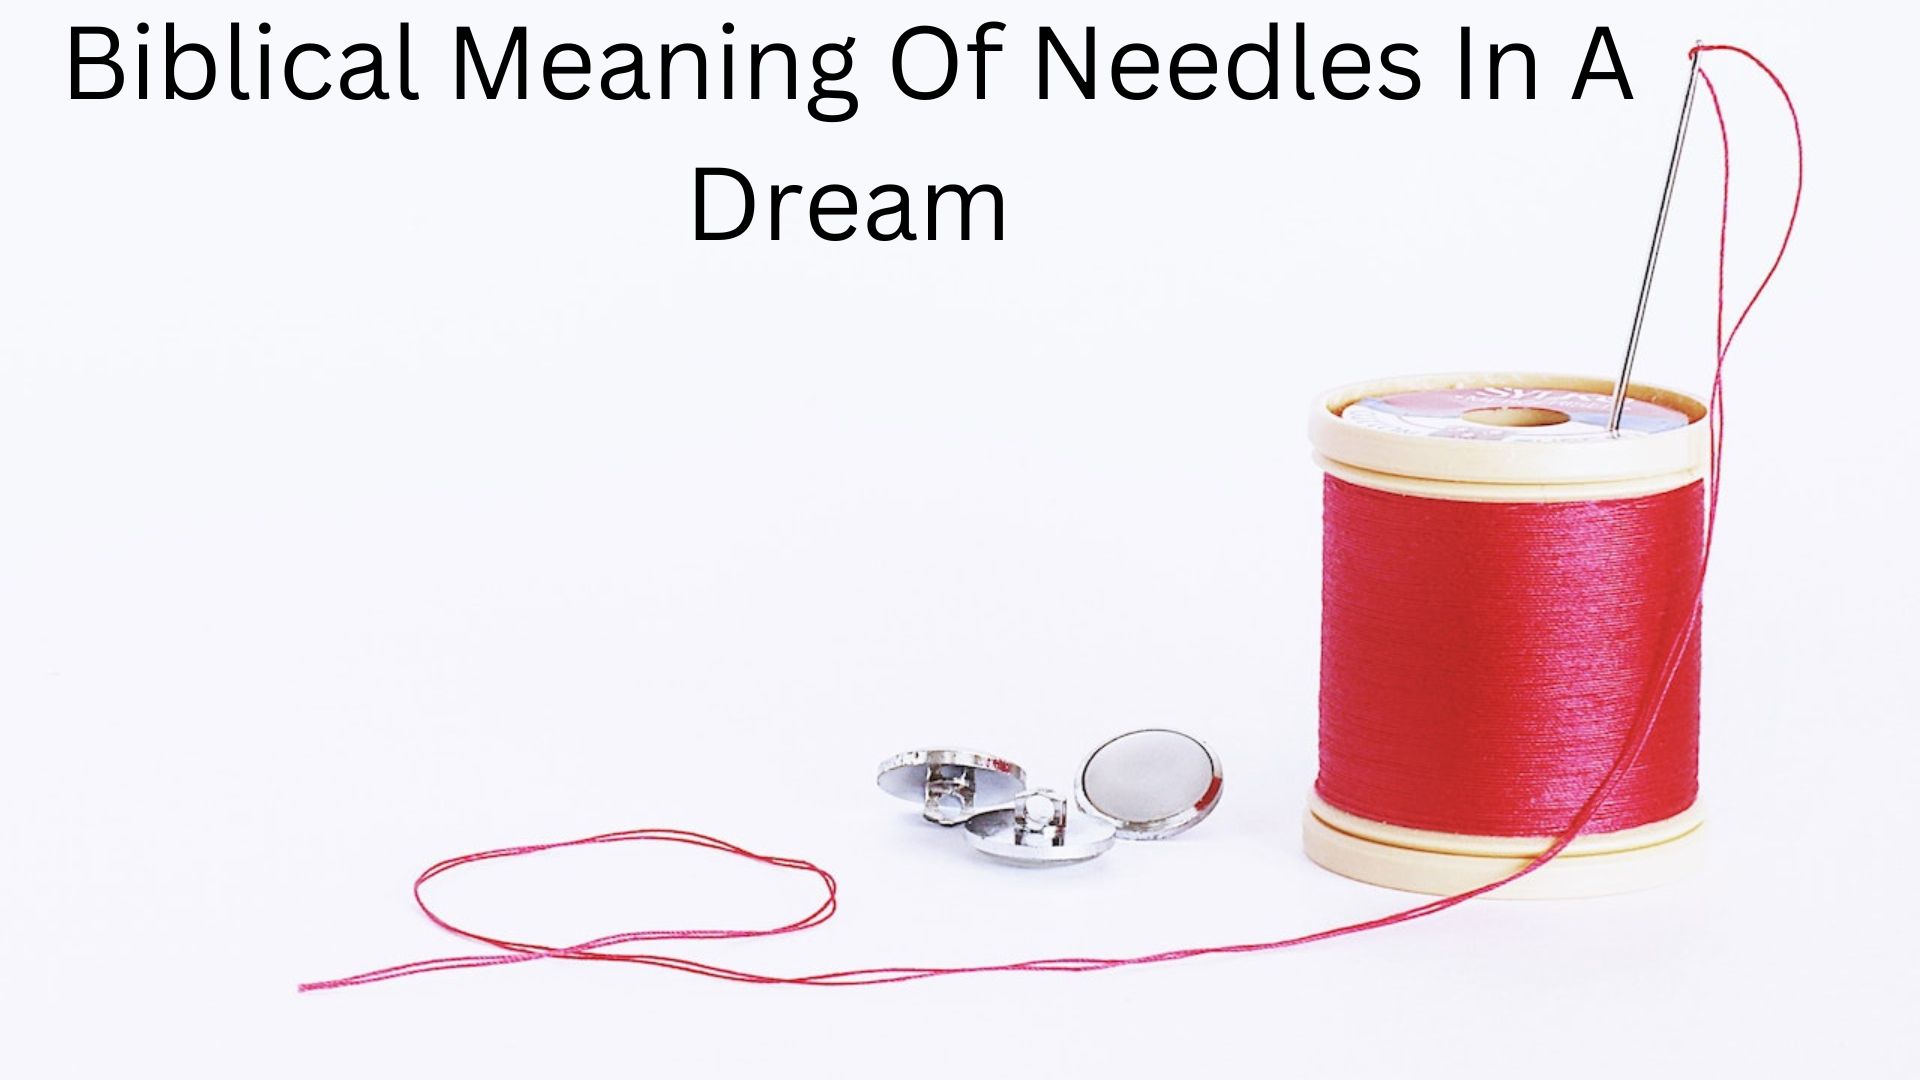 Biblical Meaning Of Needles In A Dream - Families Are At Risk Of Conflict